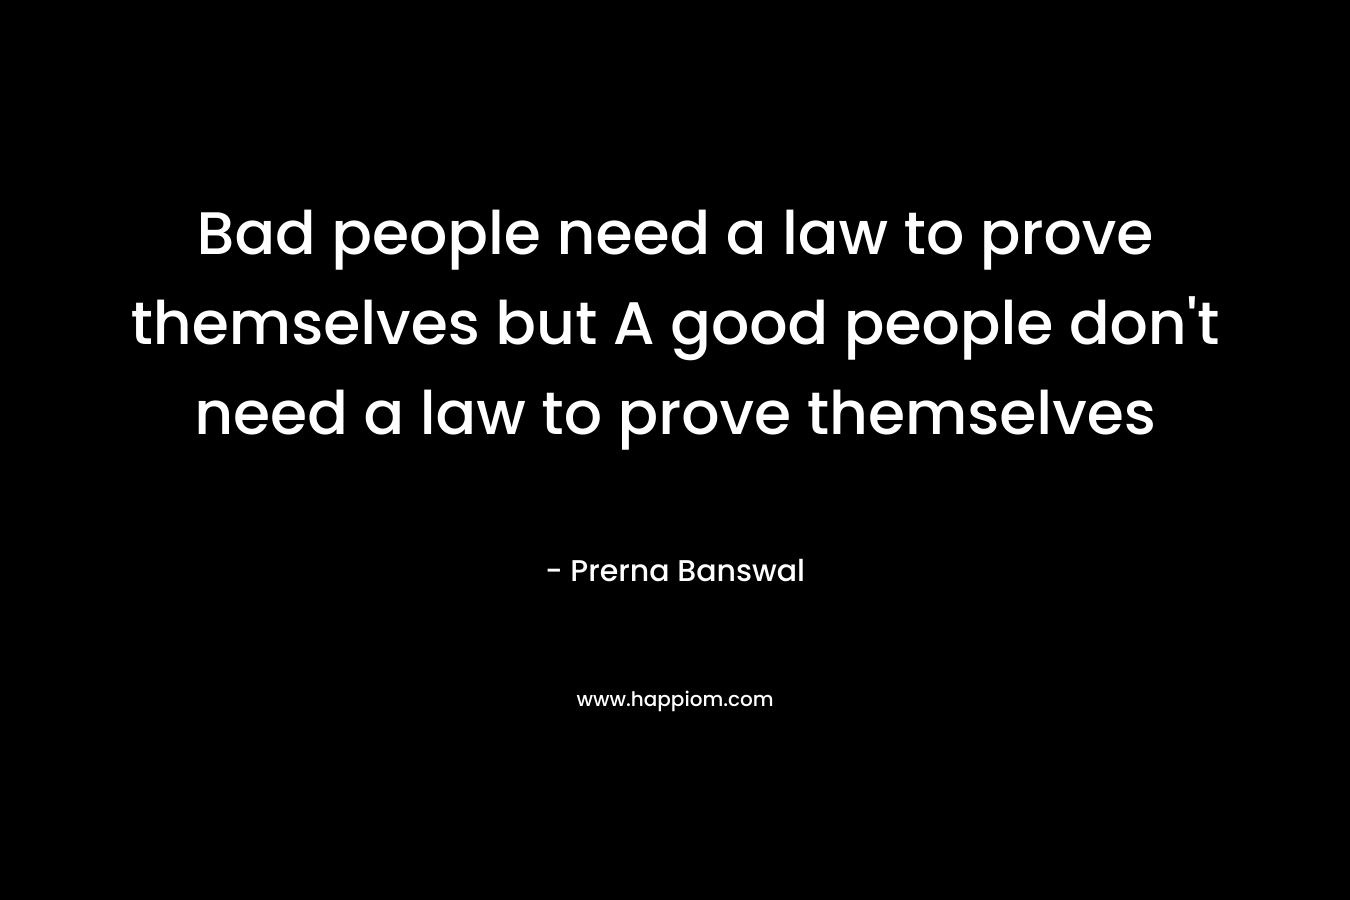 Bad people need a law to prove themselves but A good people don't need a law to prove themselves